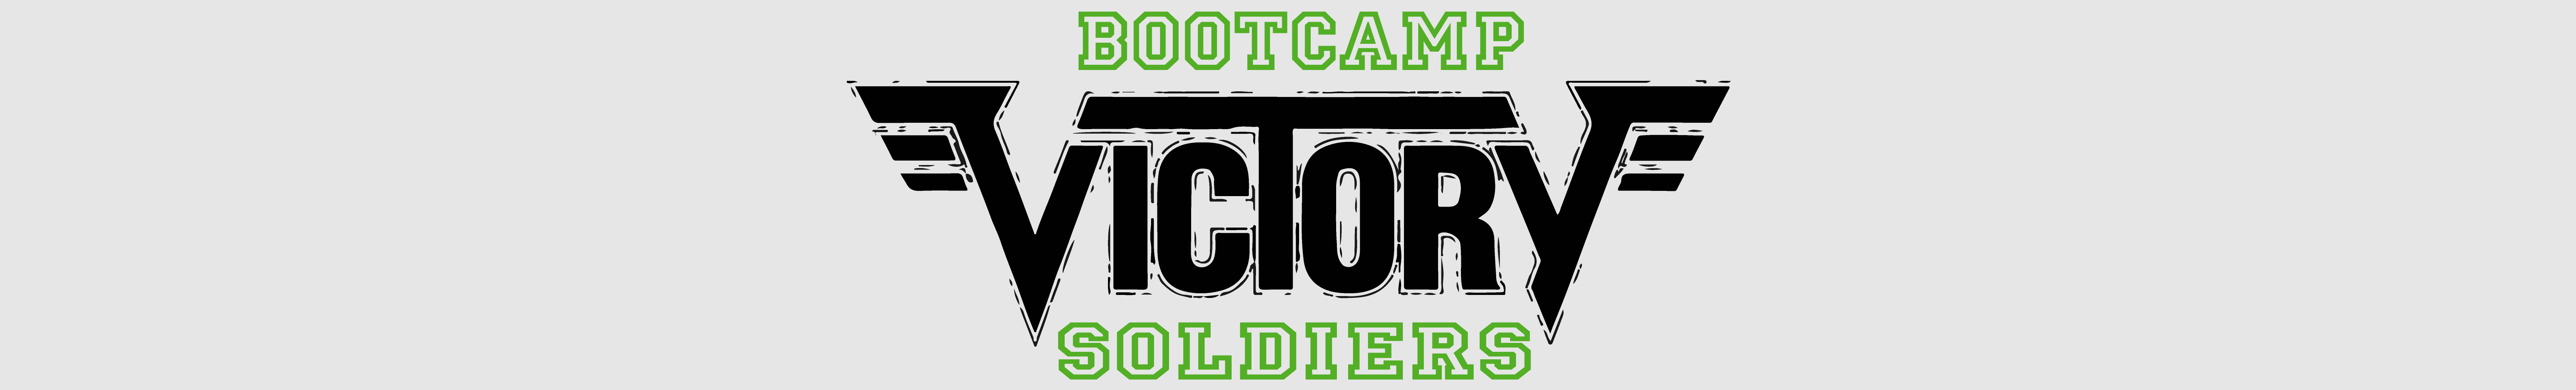 Bootcamp Victory Soldier